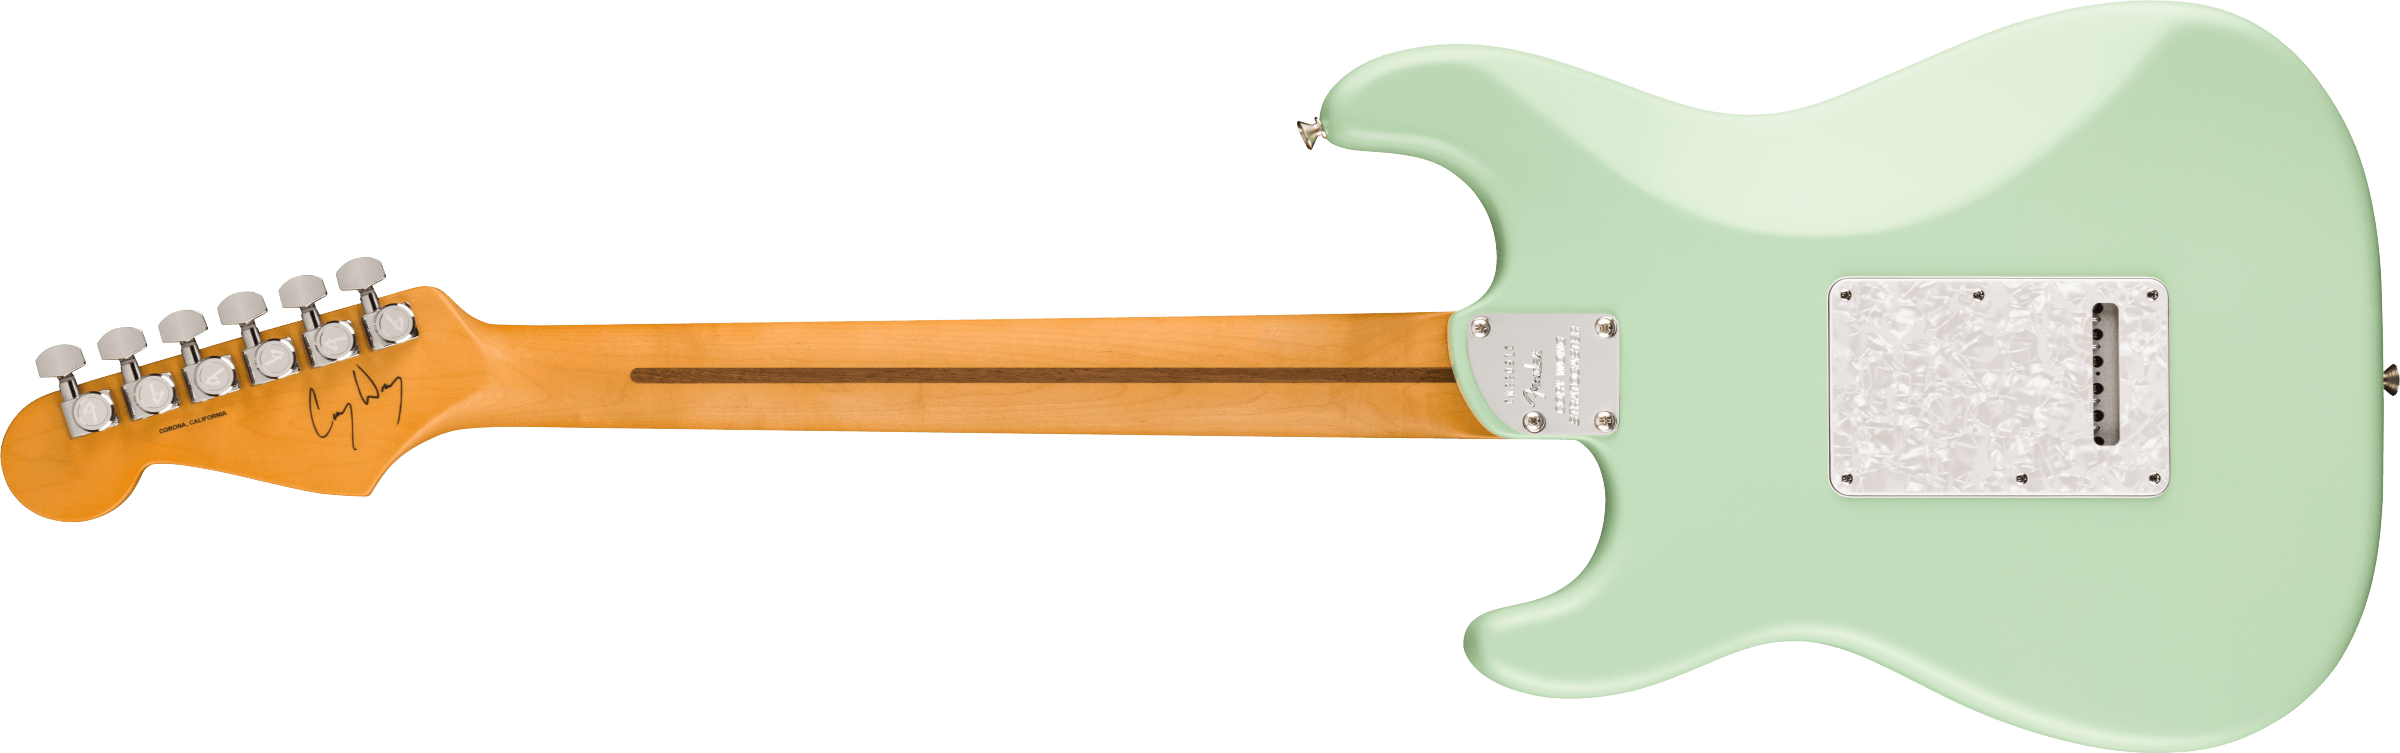 Fender Limited Edition Cory Wong Stratocaster®, Rosewood Fingerboard, Surf Green